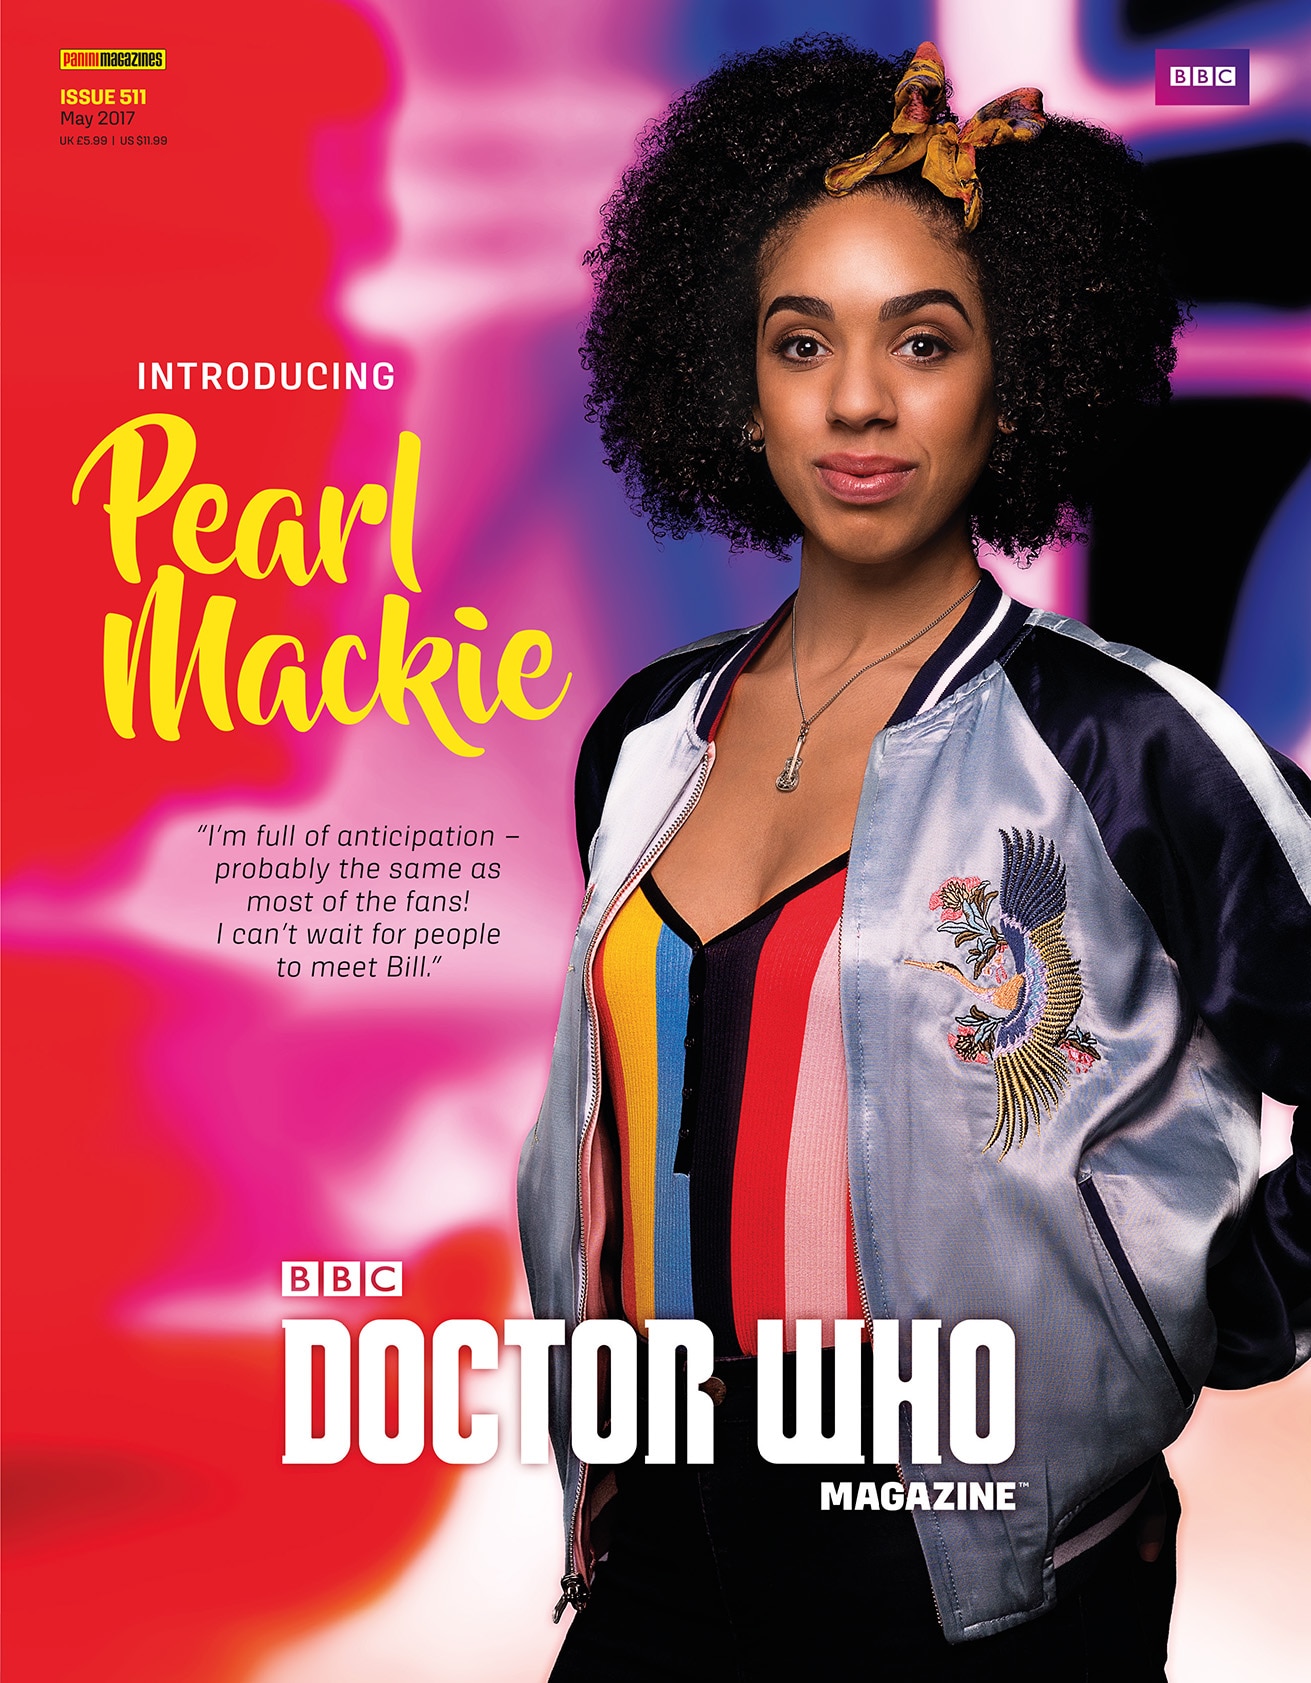 Doctor Who magazine full page of Pearl Mackie